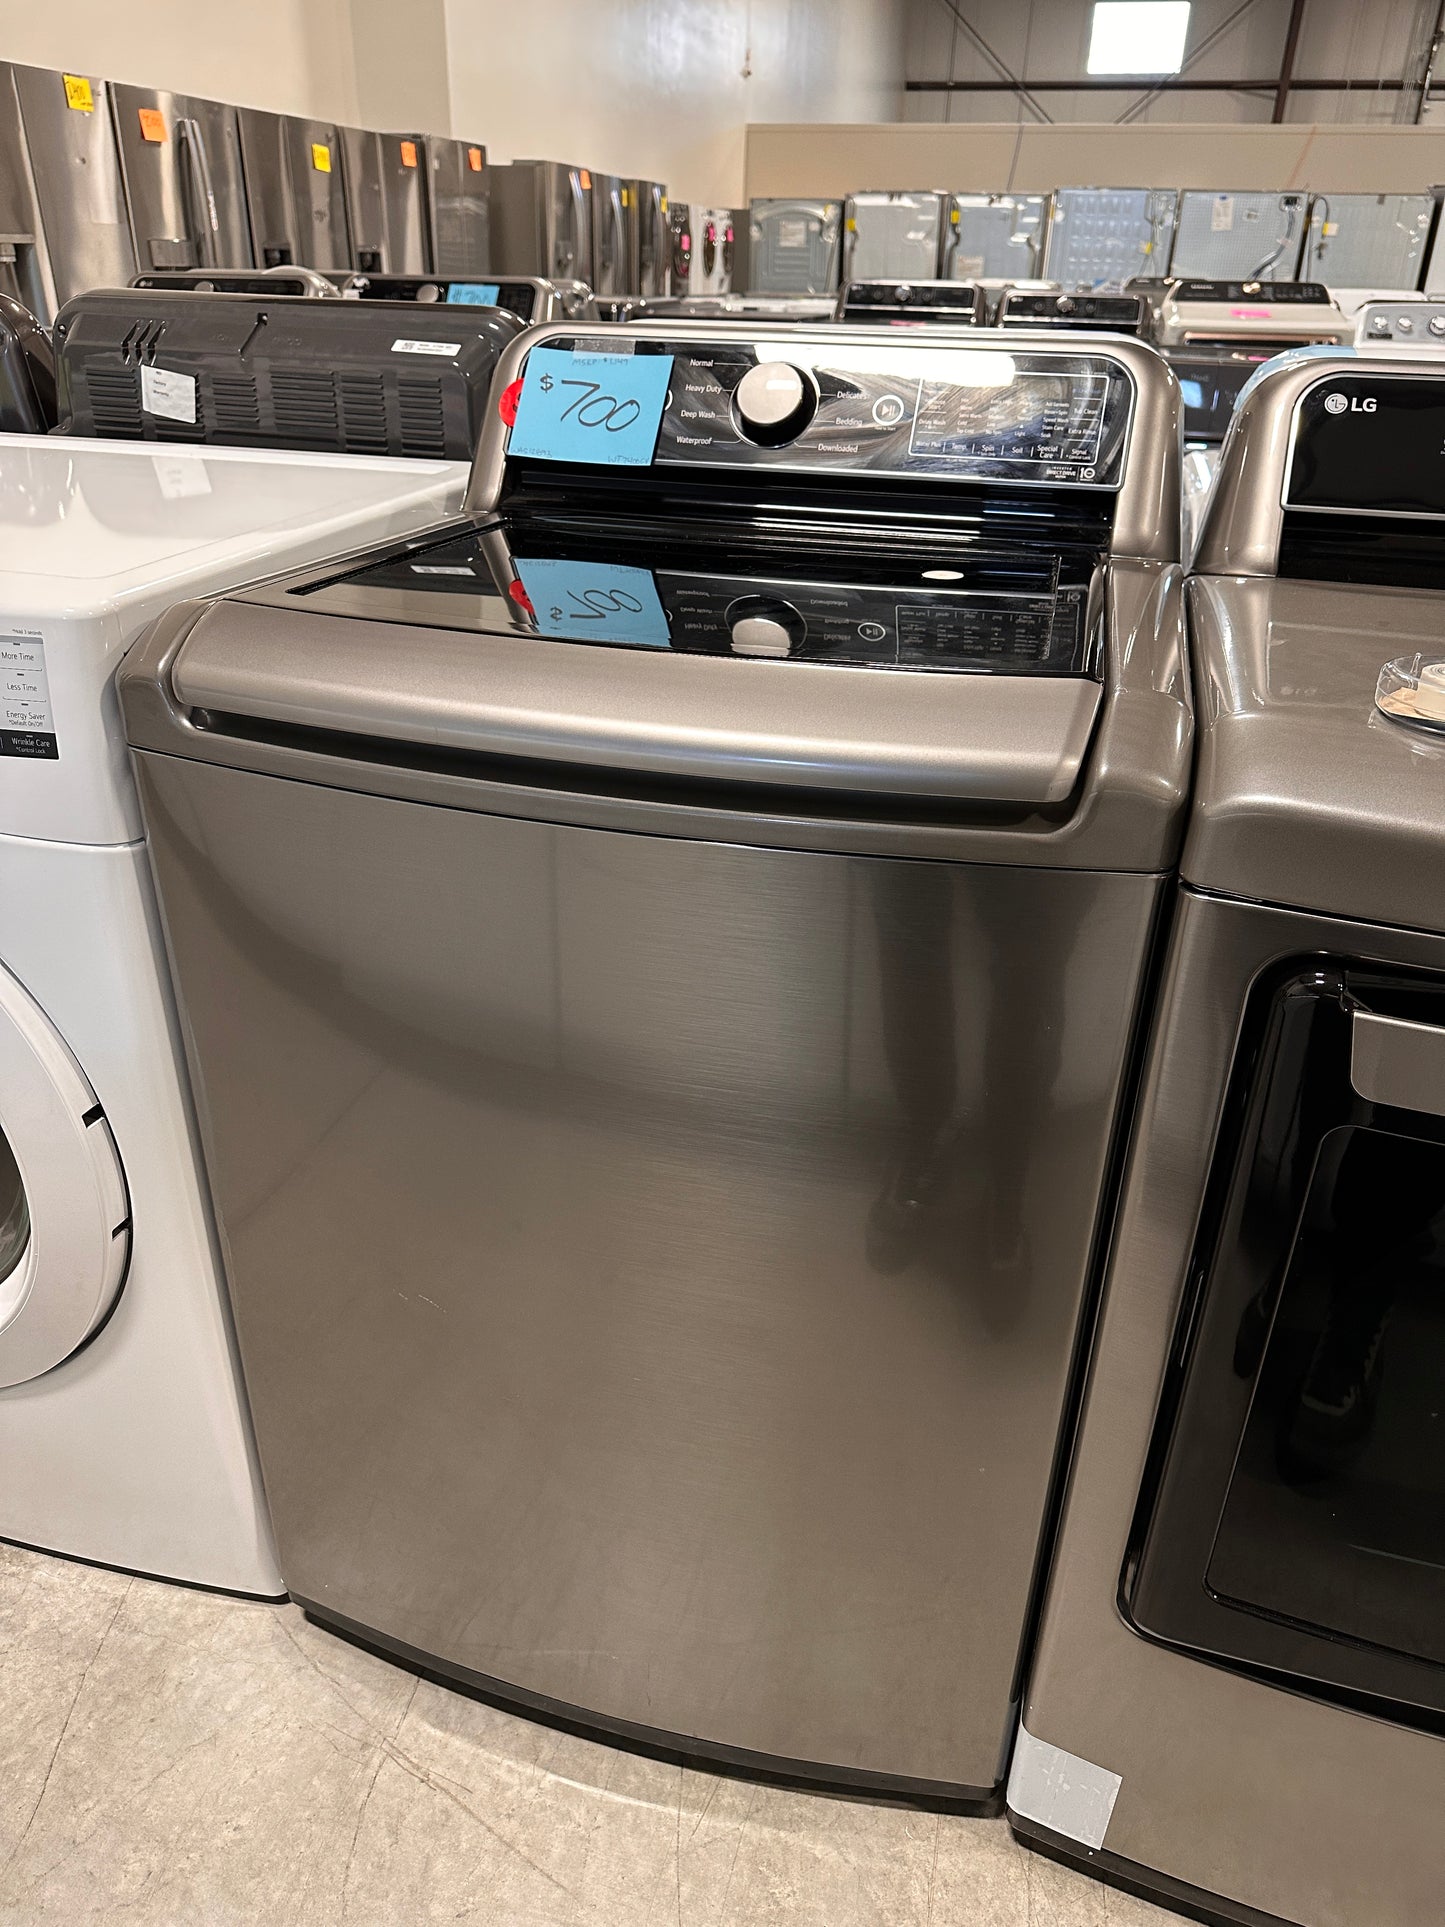 5.5 CU FT LG TOP LOAD WASHER - WAS12893